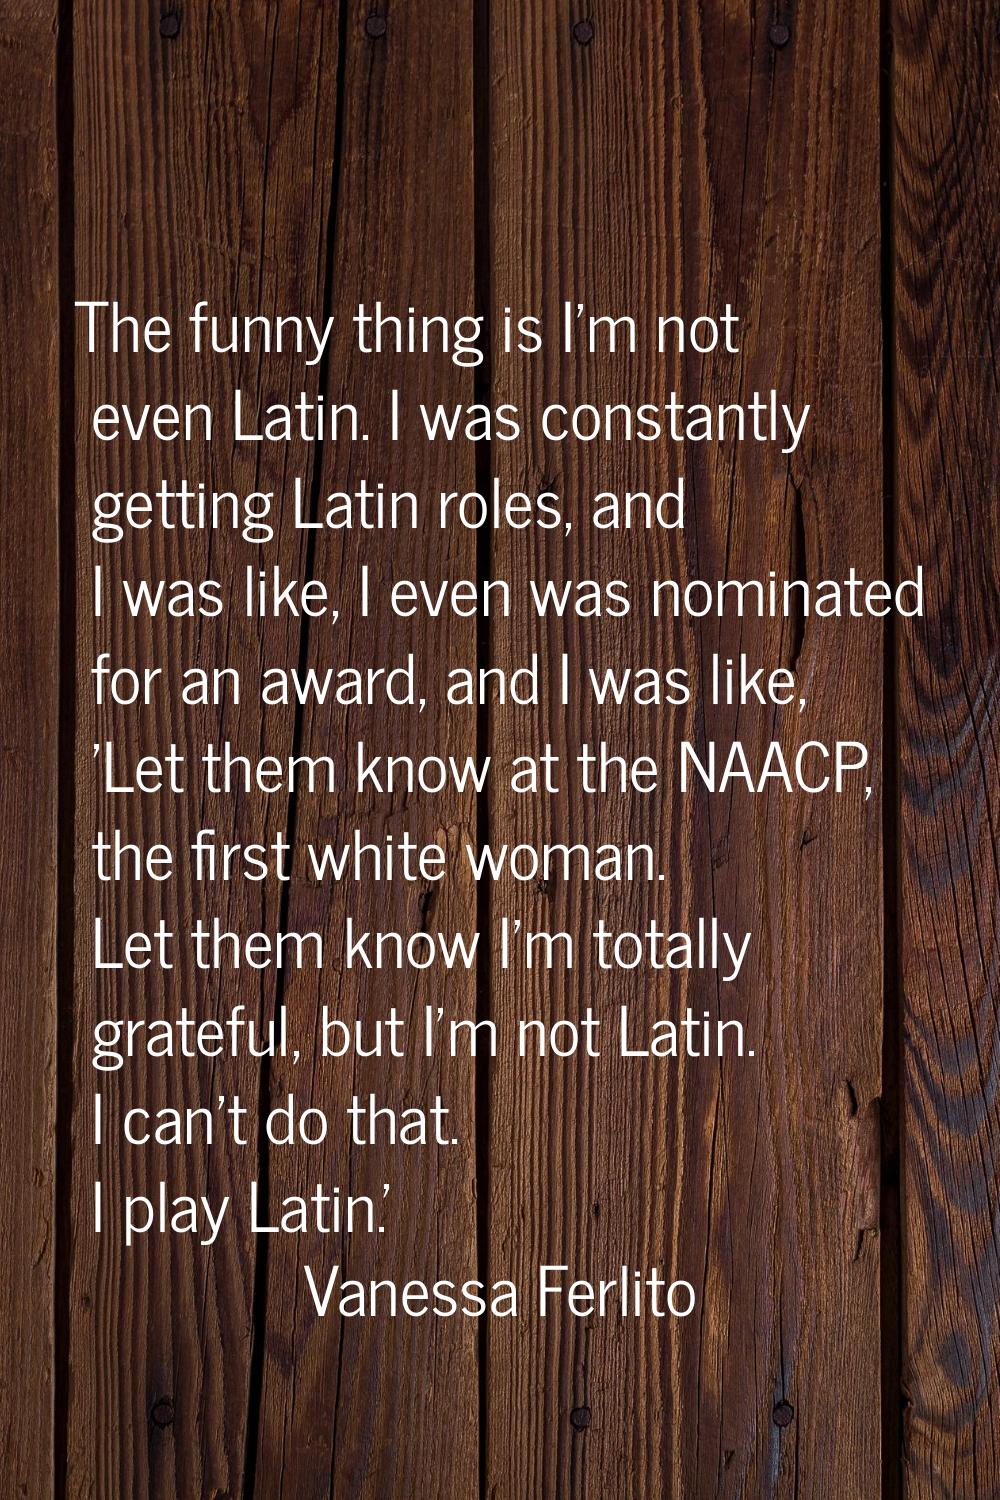 The funny thing is I'm not even Latin. I was constantly getting Latin roles, and I was like, I even